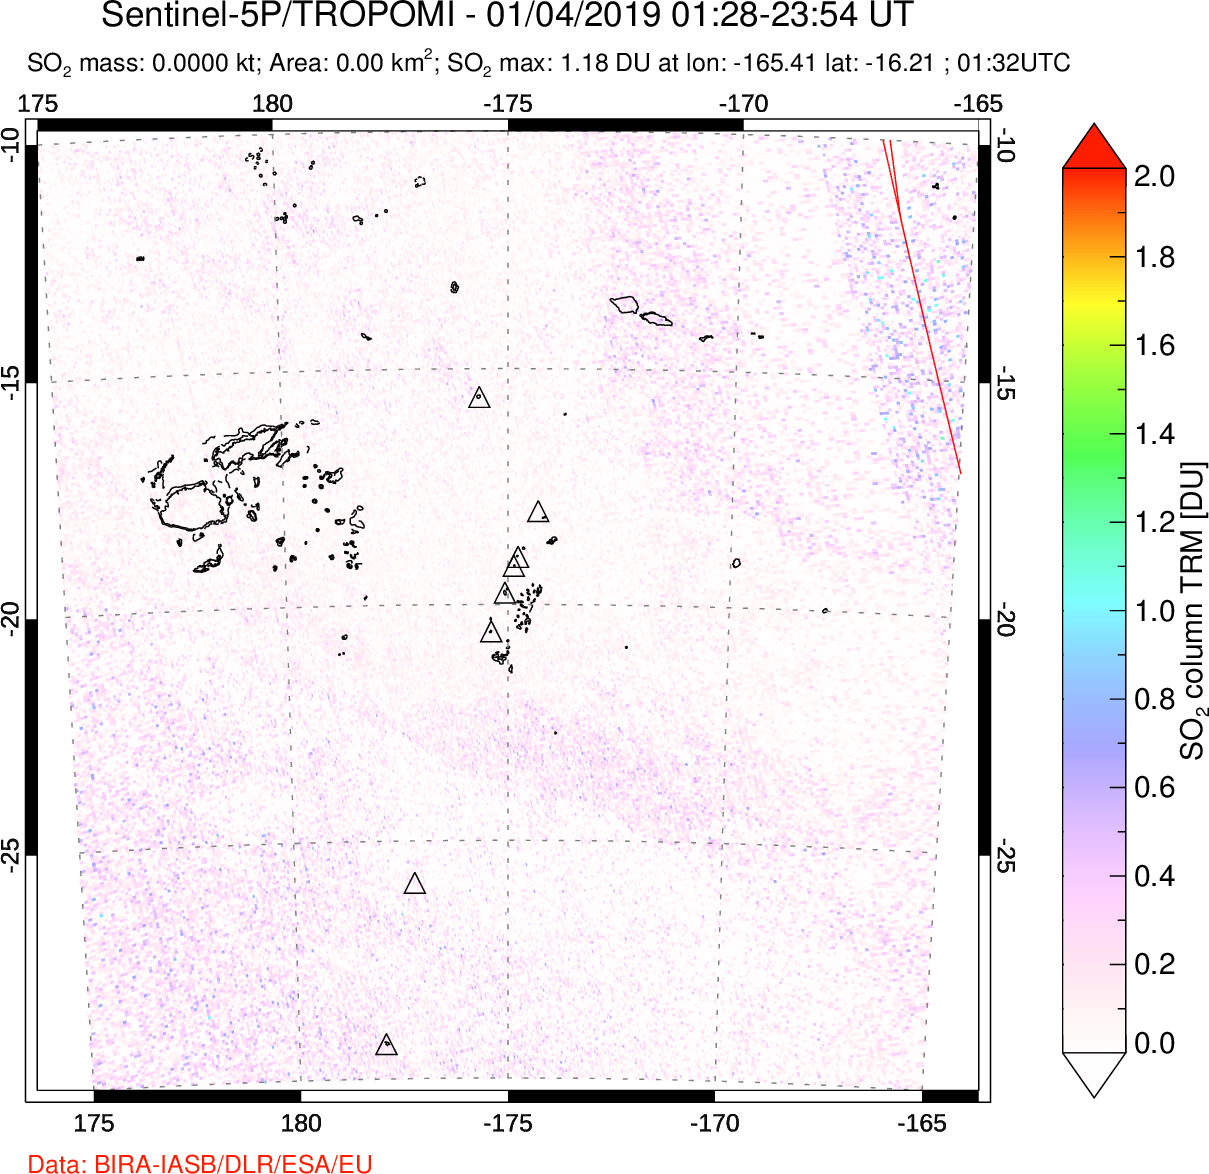 A sulfur dioxide image over Tonga, South Pacific on Jan 04, 2019.